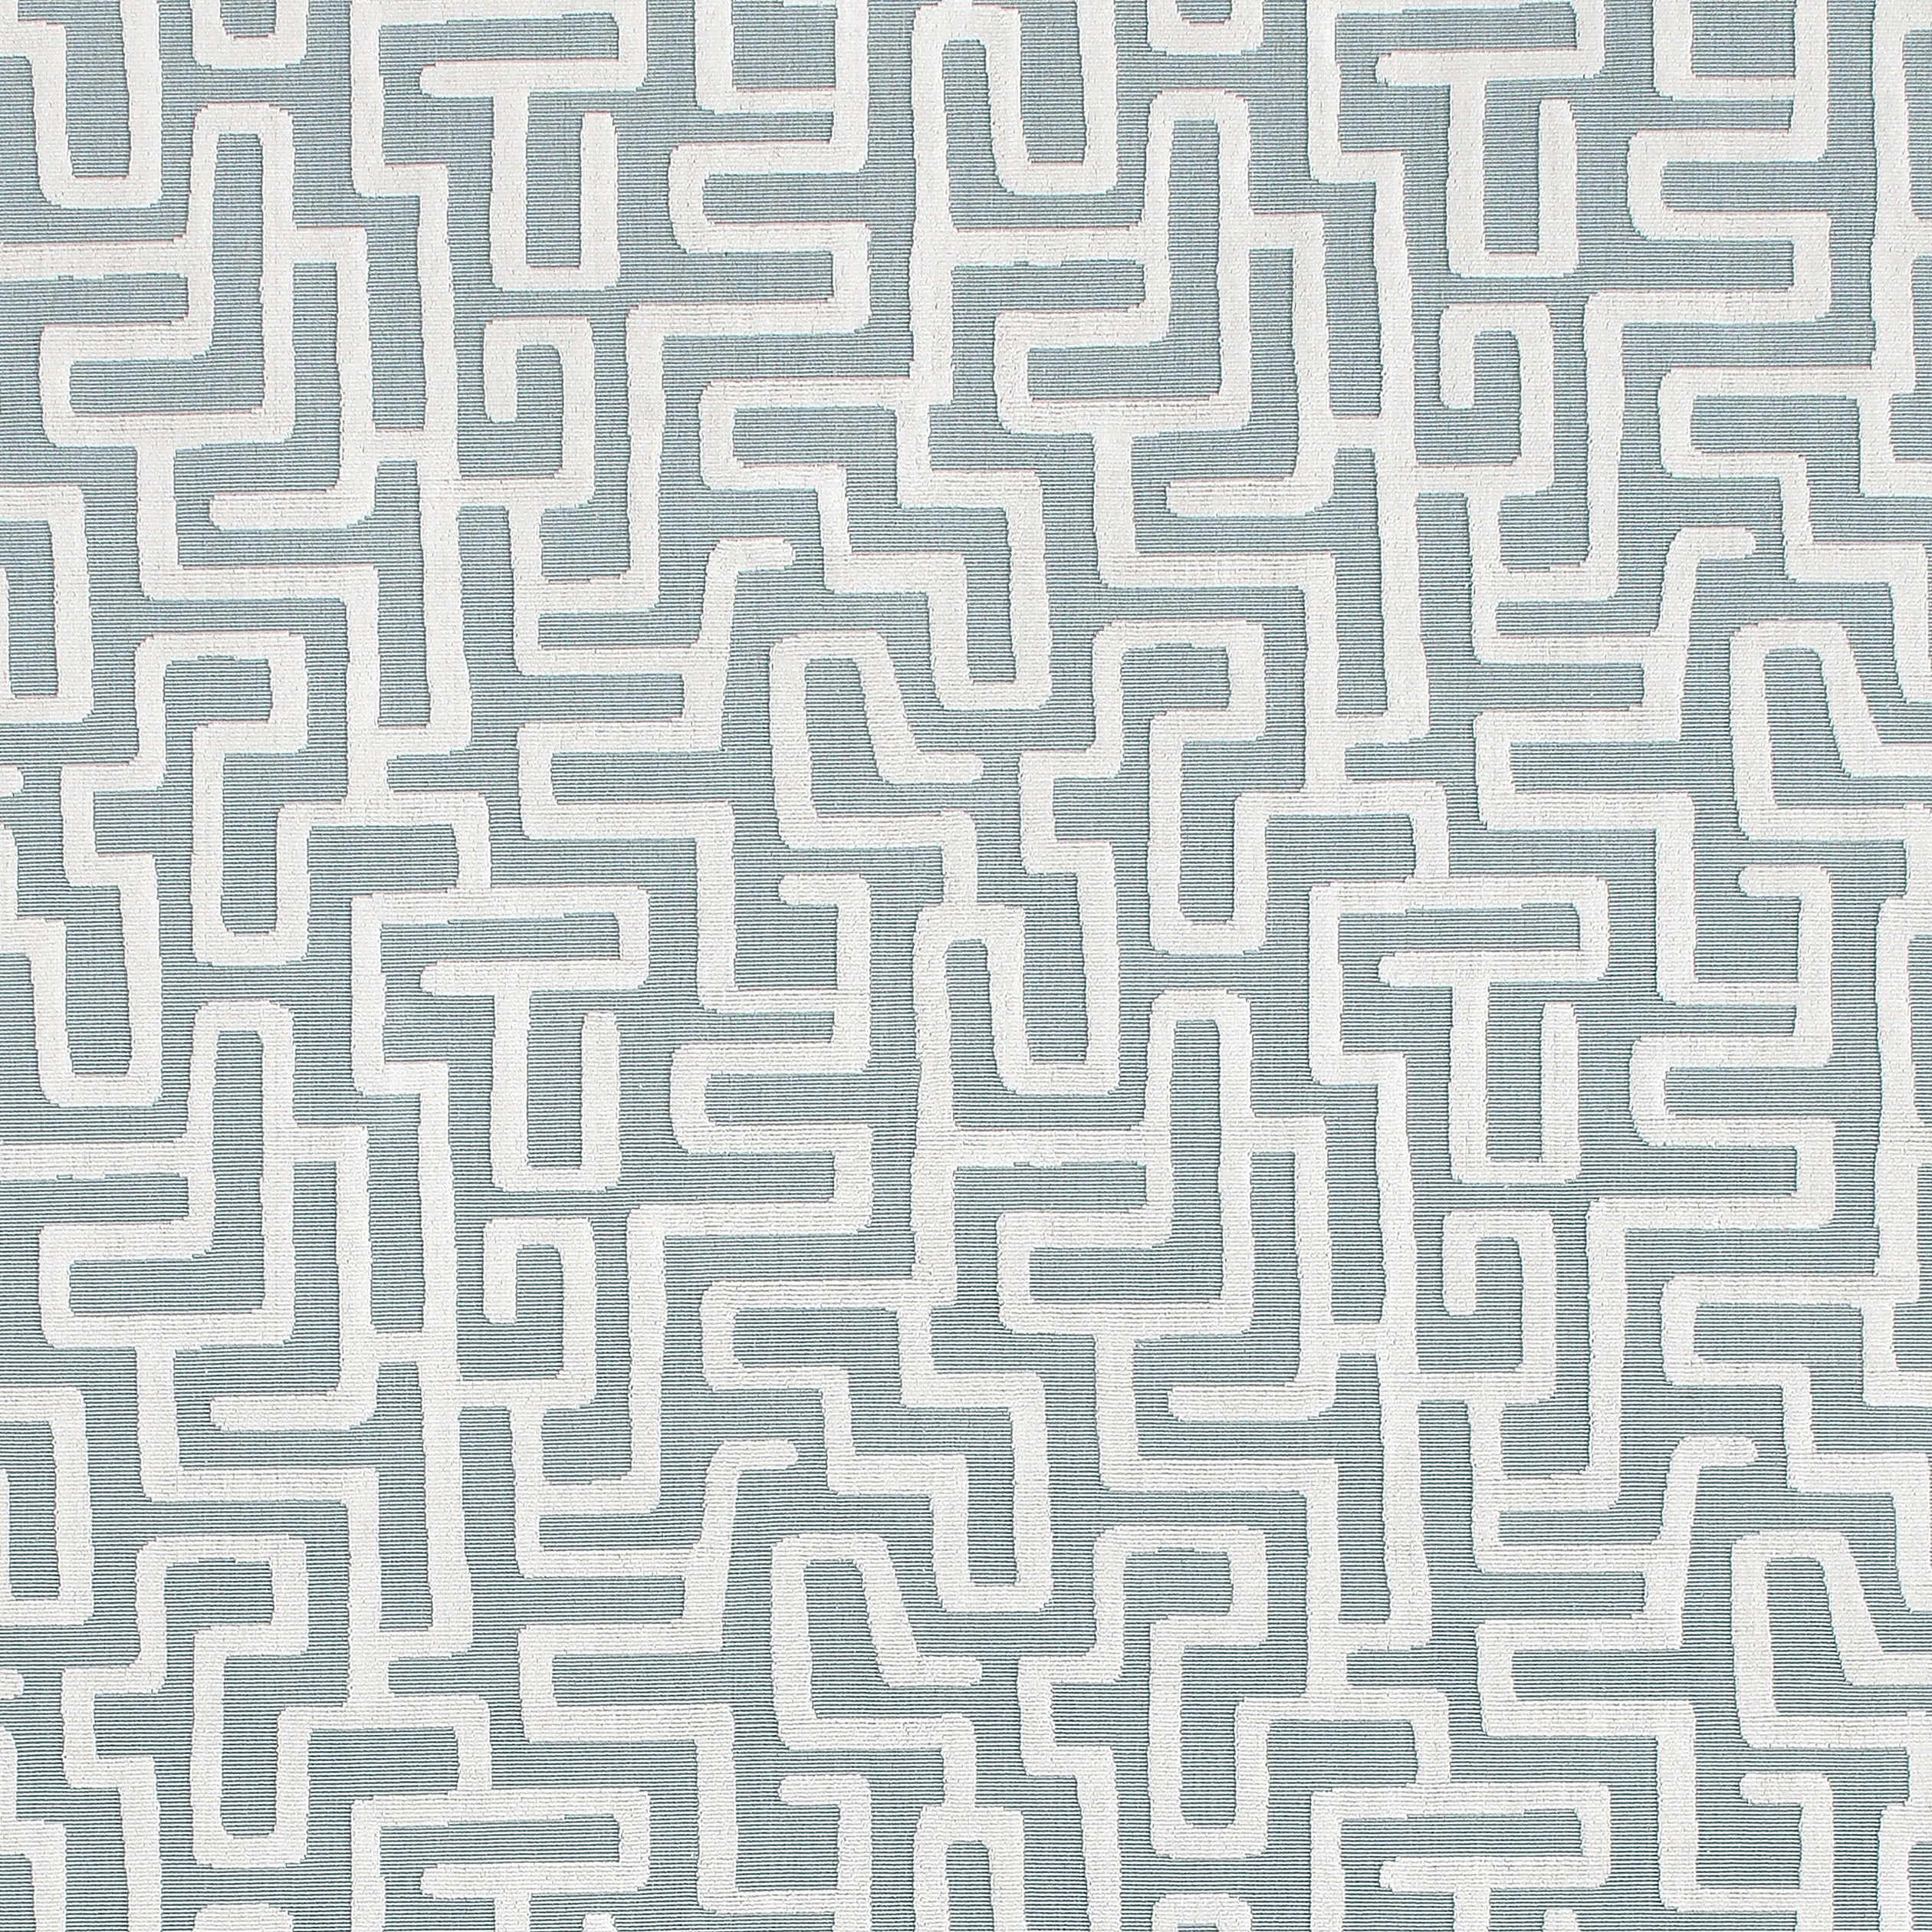 Terrace Lane fabric in spa blue color - pattern number W742030 - by Thibaut in the Sojourn collection